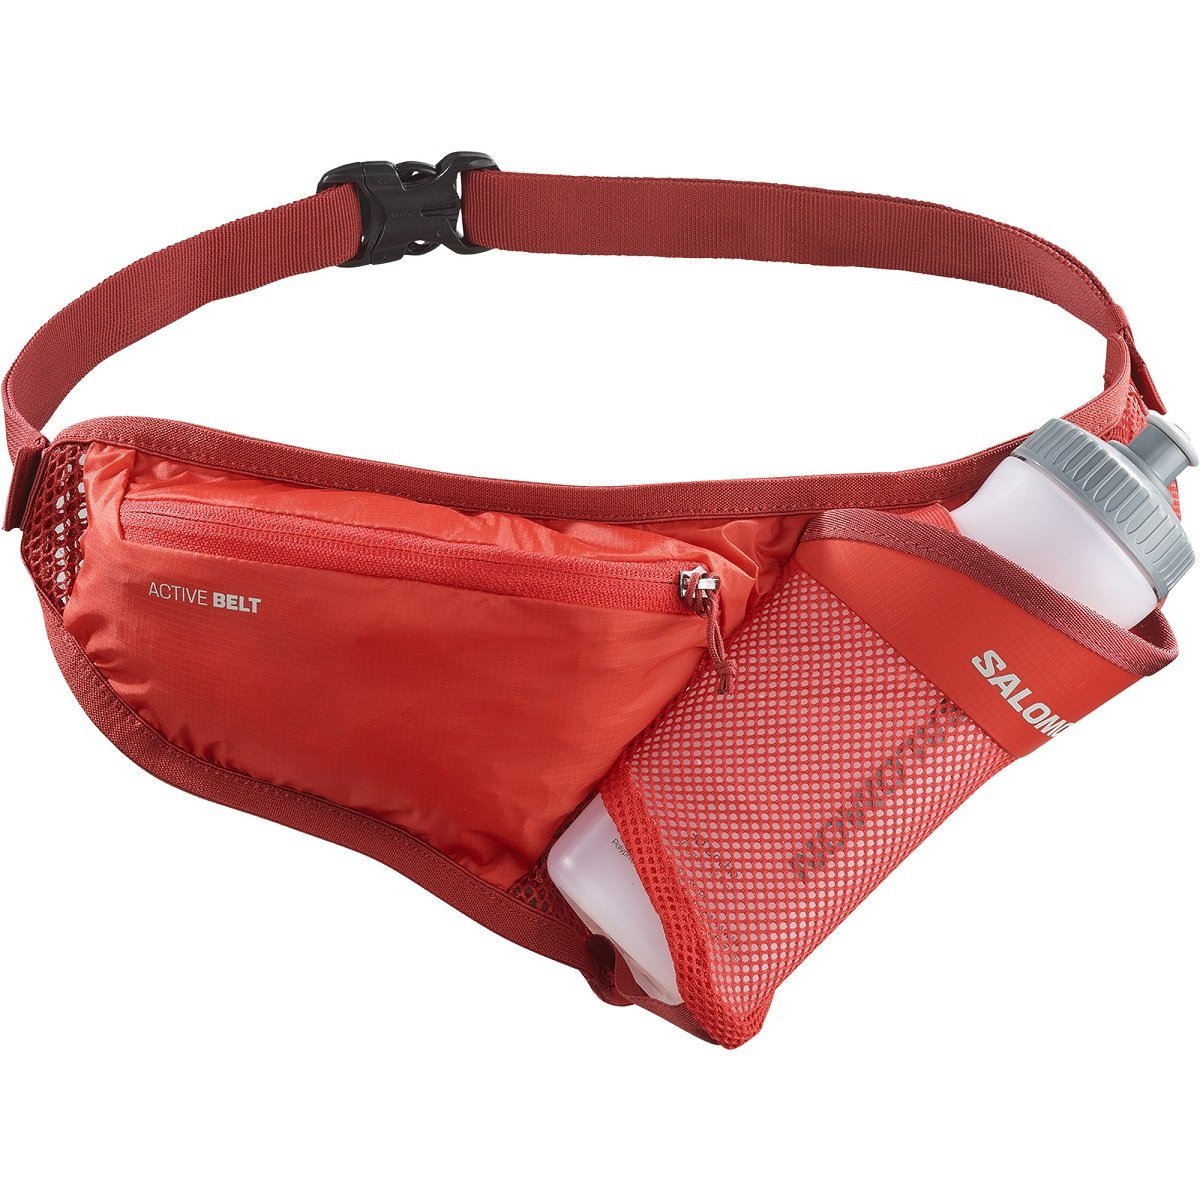 LC2179100_0_GHO_ACTIVE BELT 3D BOTTLE-HIGH RISK RED-RED.png.high-res